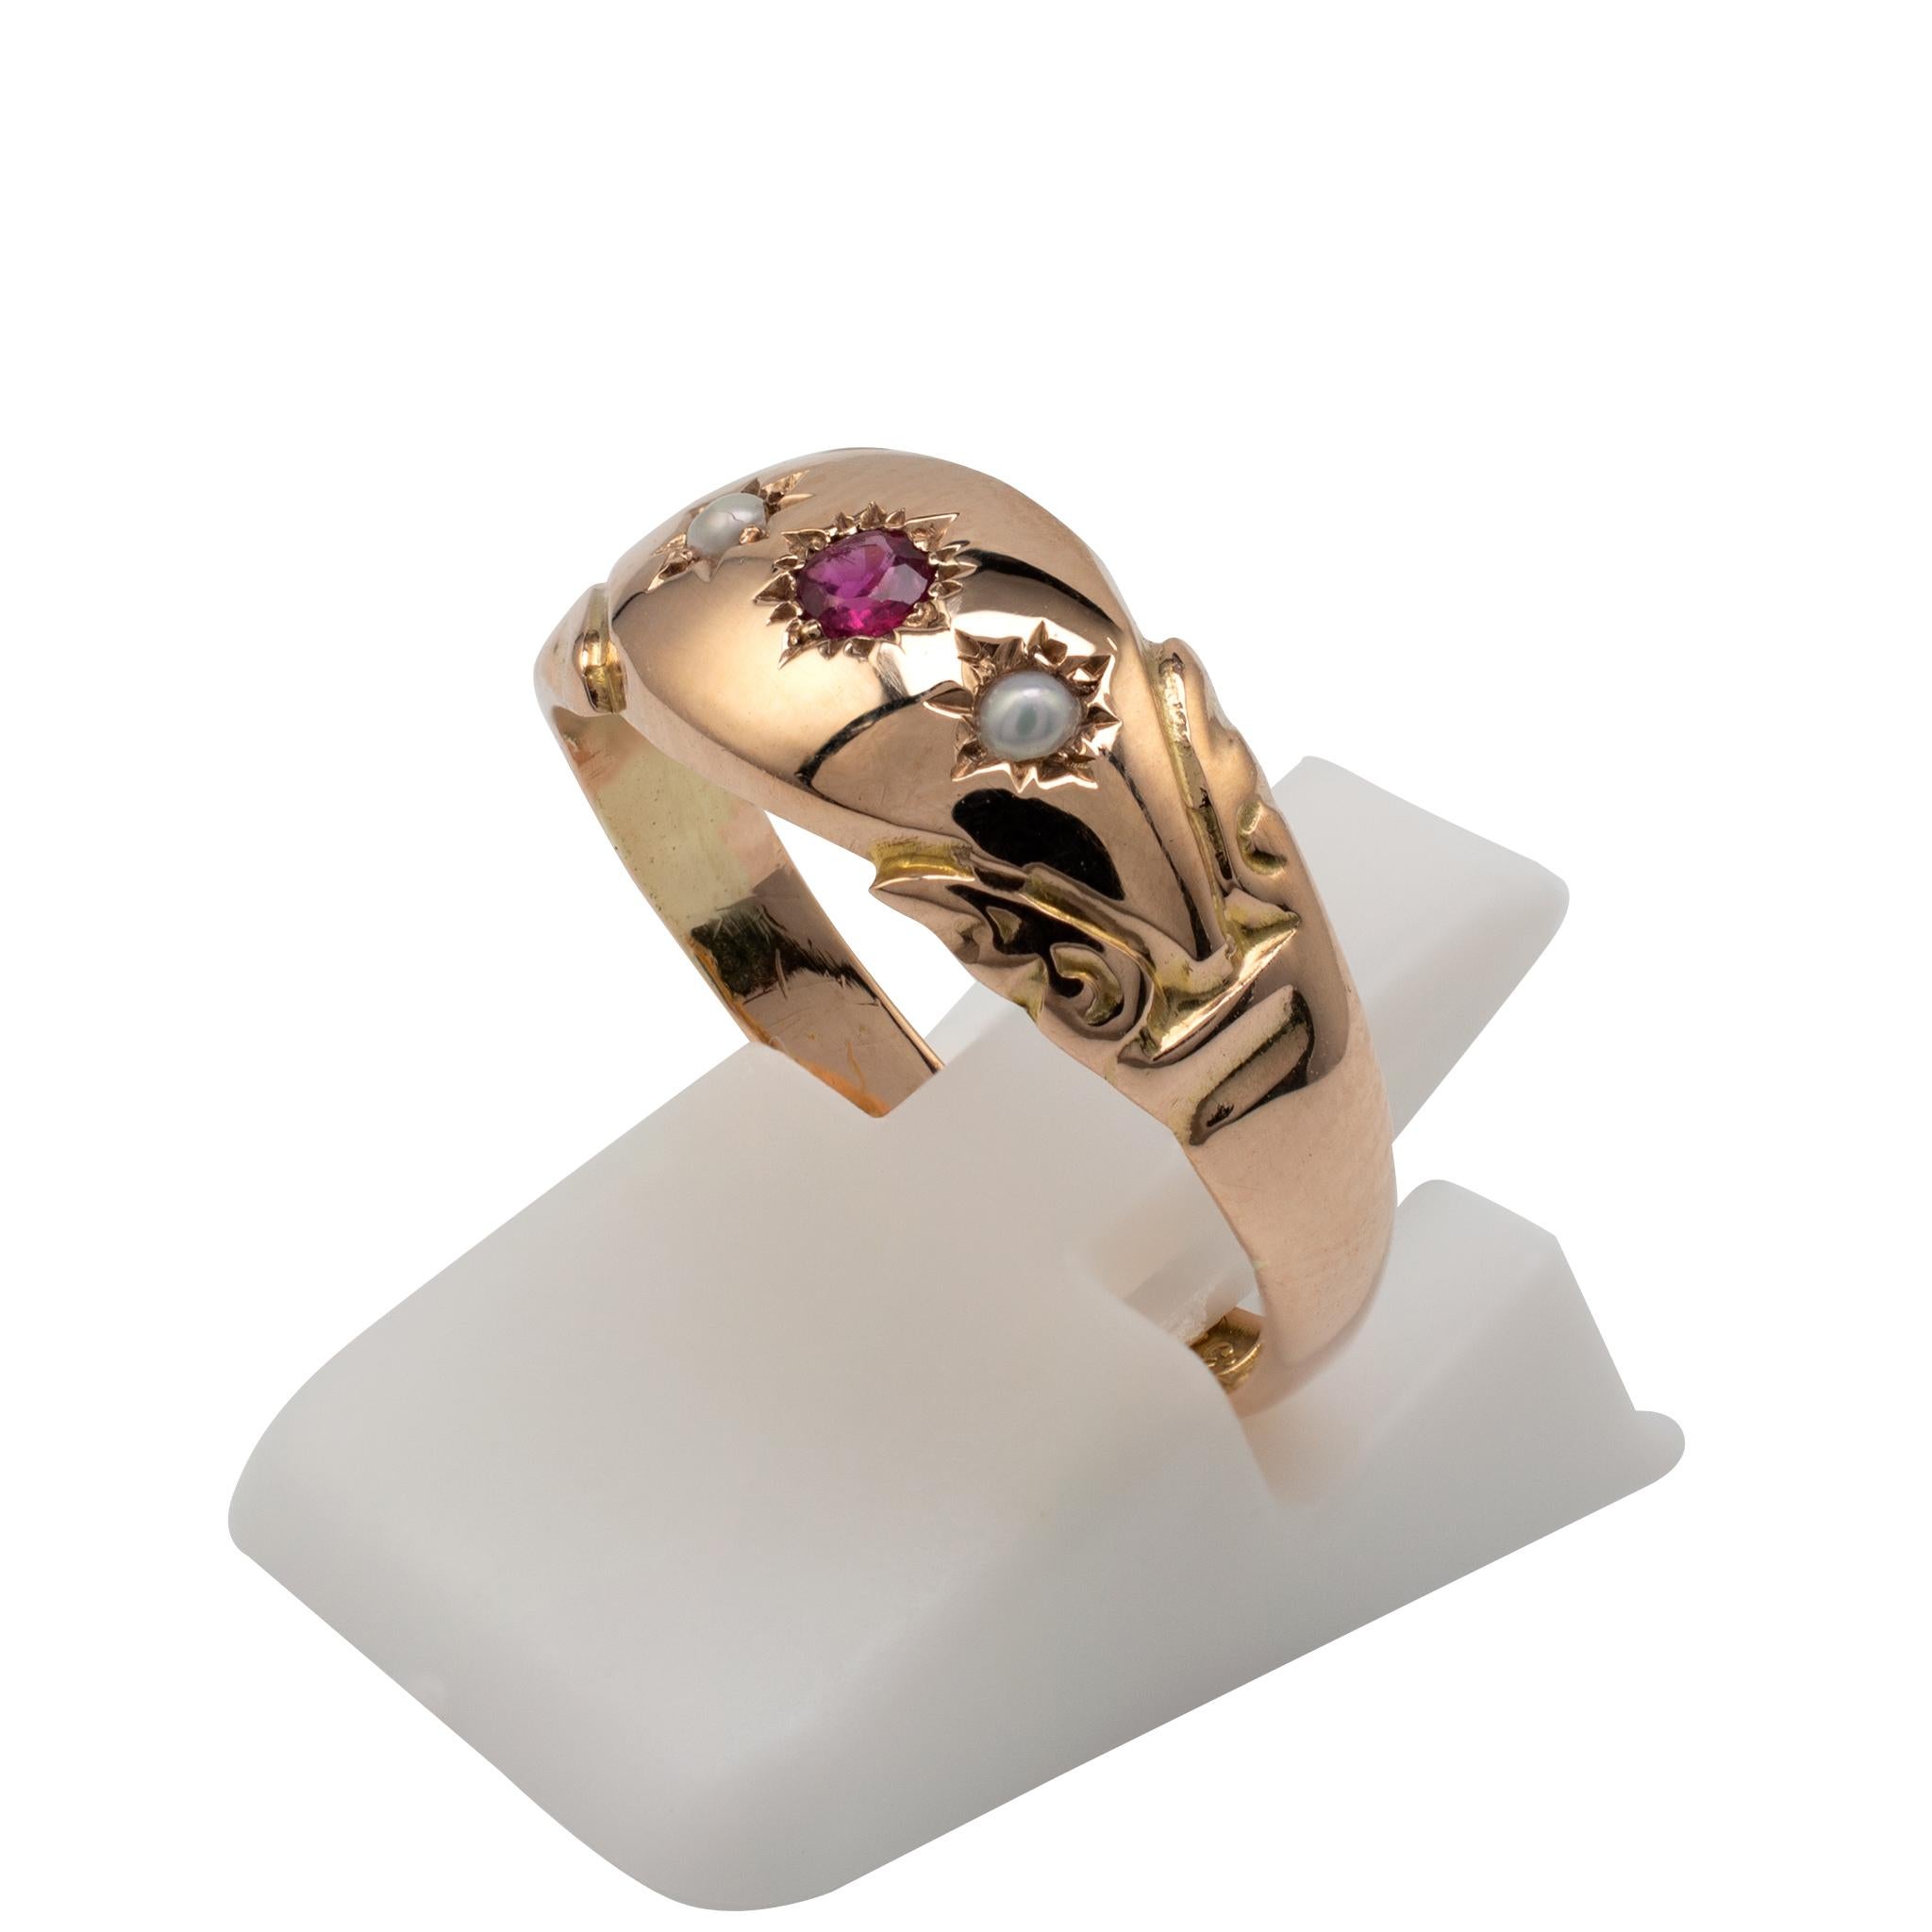 This gorgeous antique English rose gold ruby and pearl gypsy ring is fully hallmarked and dated for London 1918.

The smooth rose gold boat shape setting is set with a round cut ruby to the center with complimenting seed pearls. The stones are set